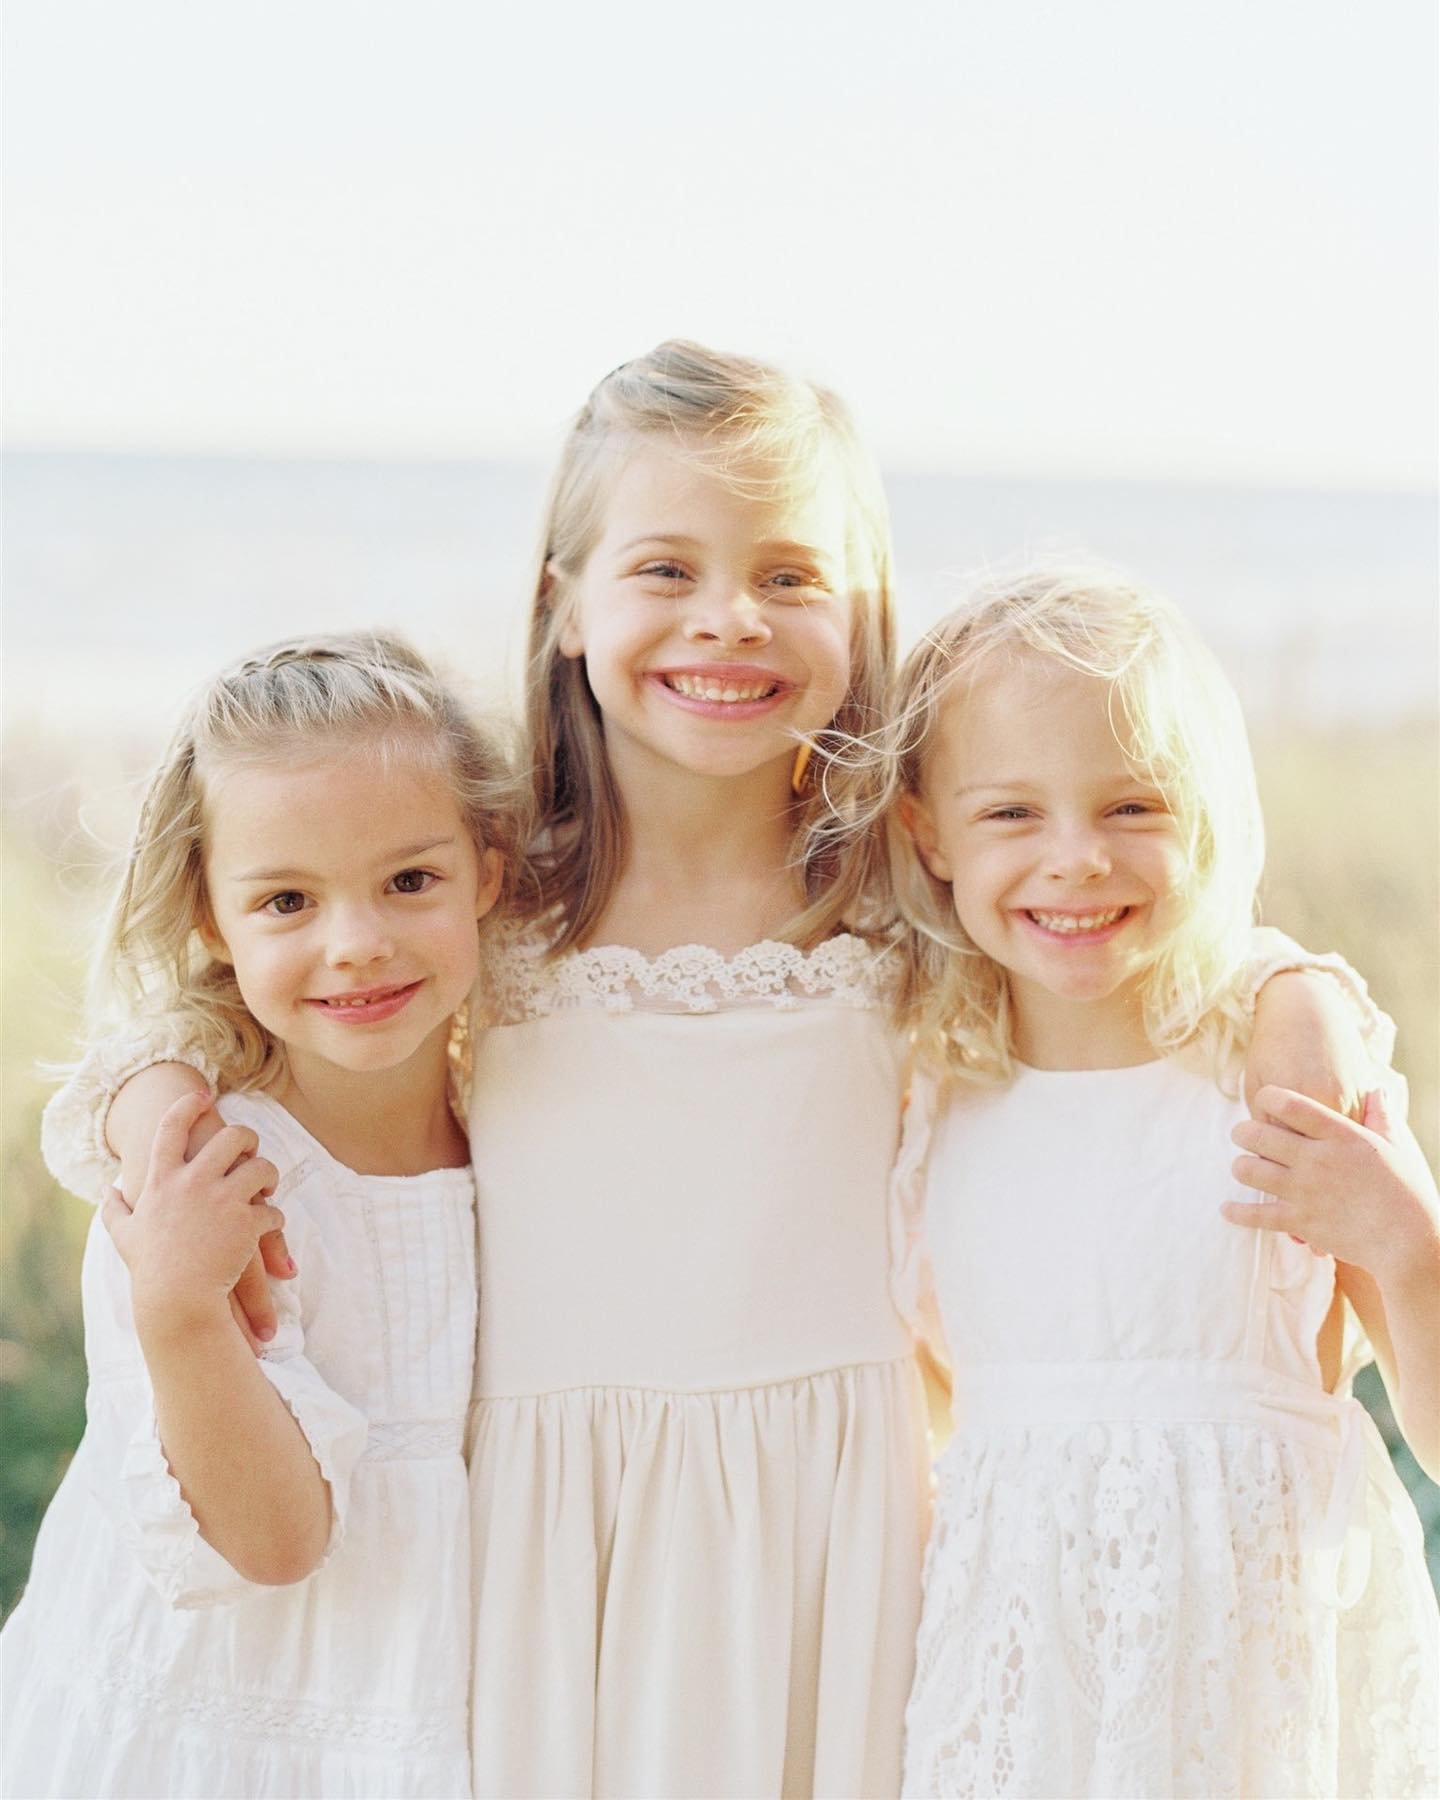 These girls have been keeping me busy lately with all the end of school activities! I&rsquo;m prepping to do lots and lots of family sessions this week and so excited to see how much your babies have grown since I&rsquo;ve last seen them!

We have on